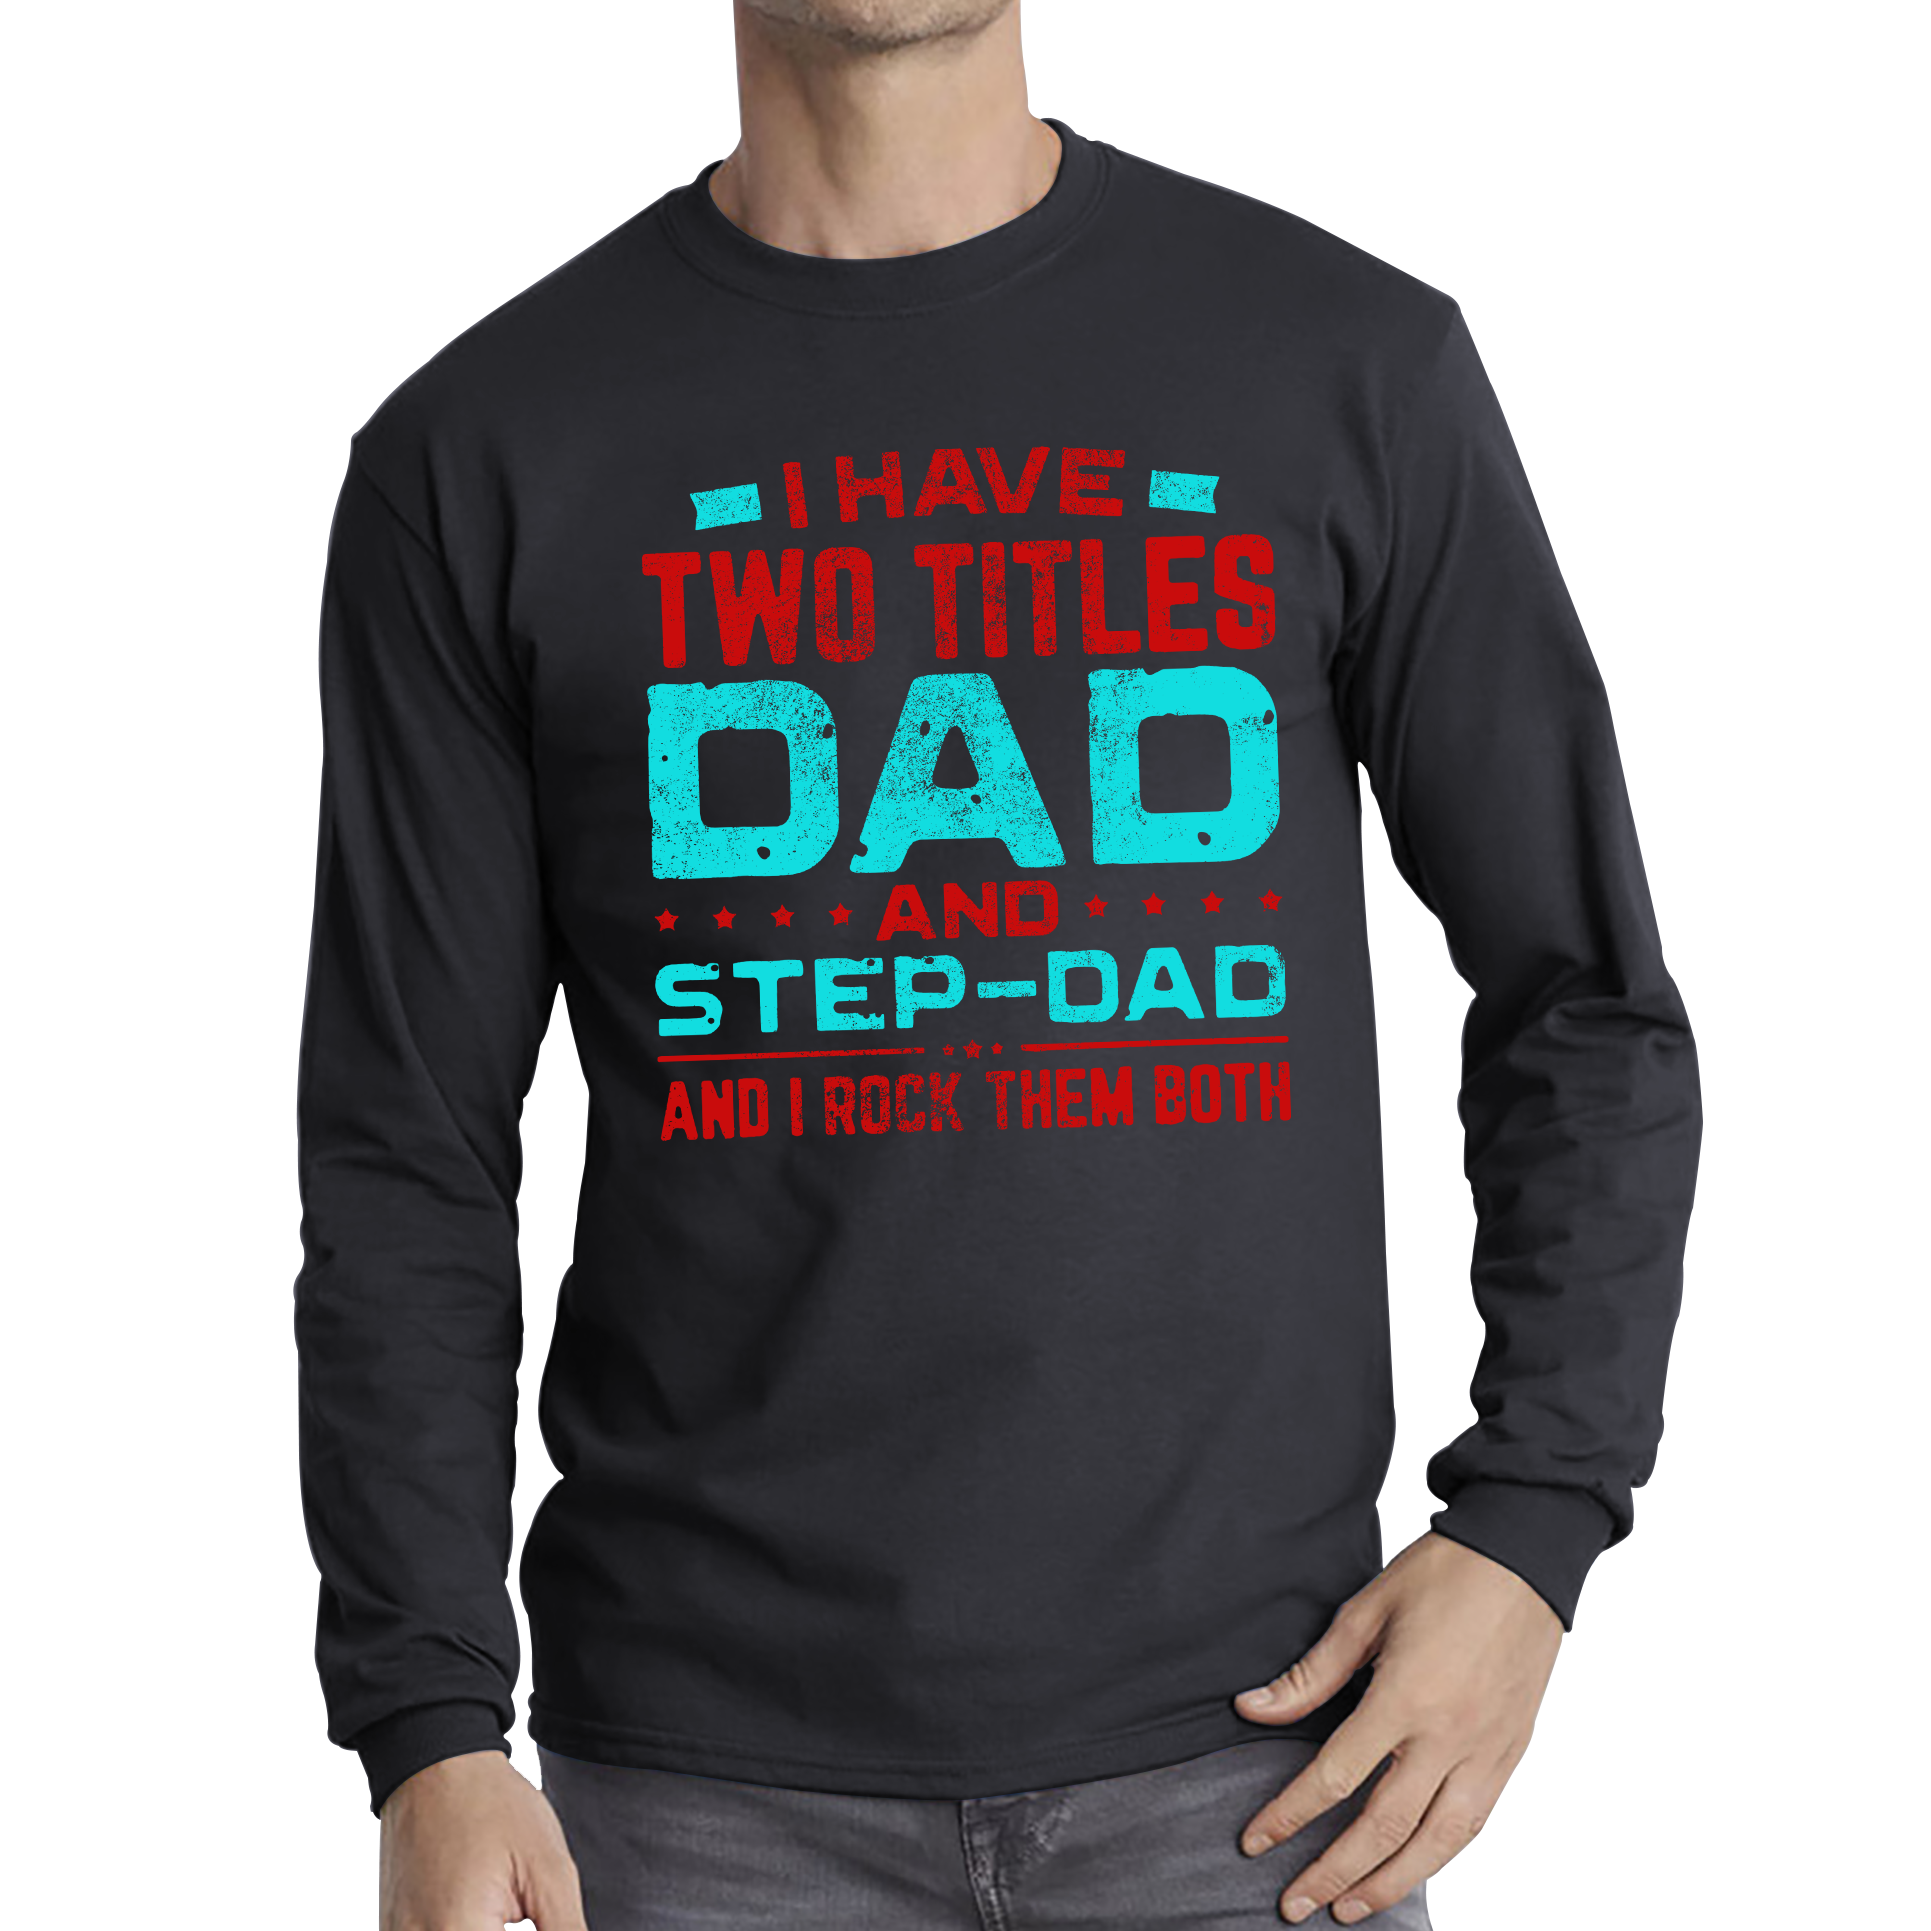 I Have Two Titles Dad And Step Dad And I Rock Them Both Adult Long Sleeve T Shirt